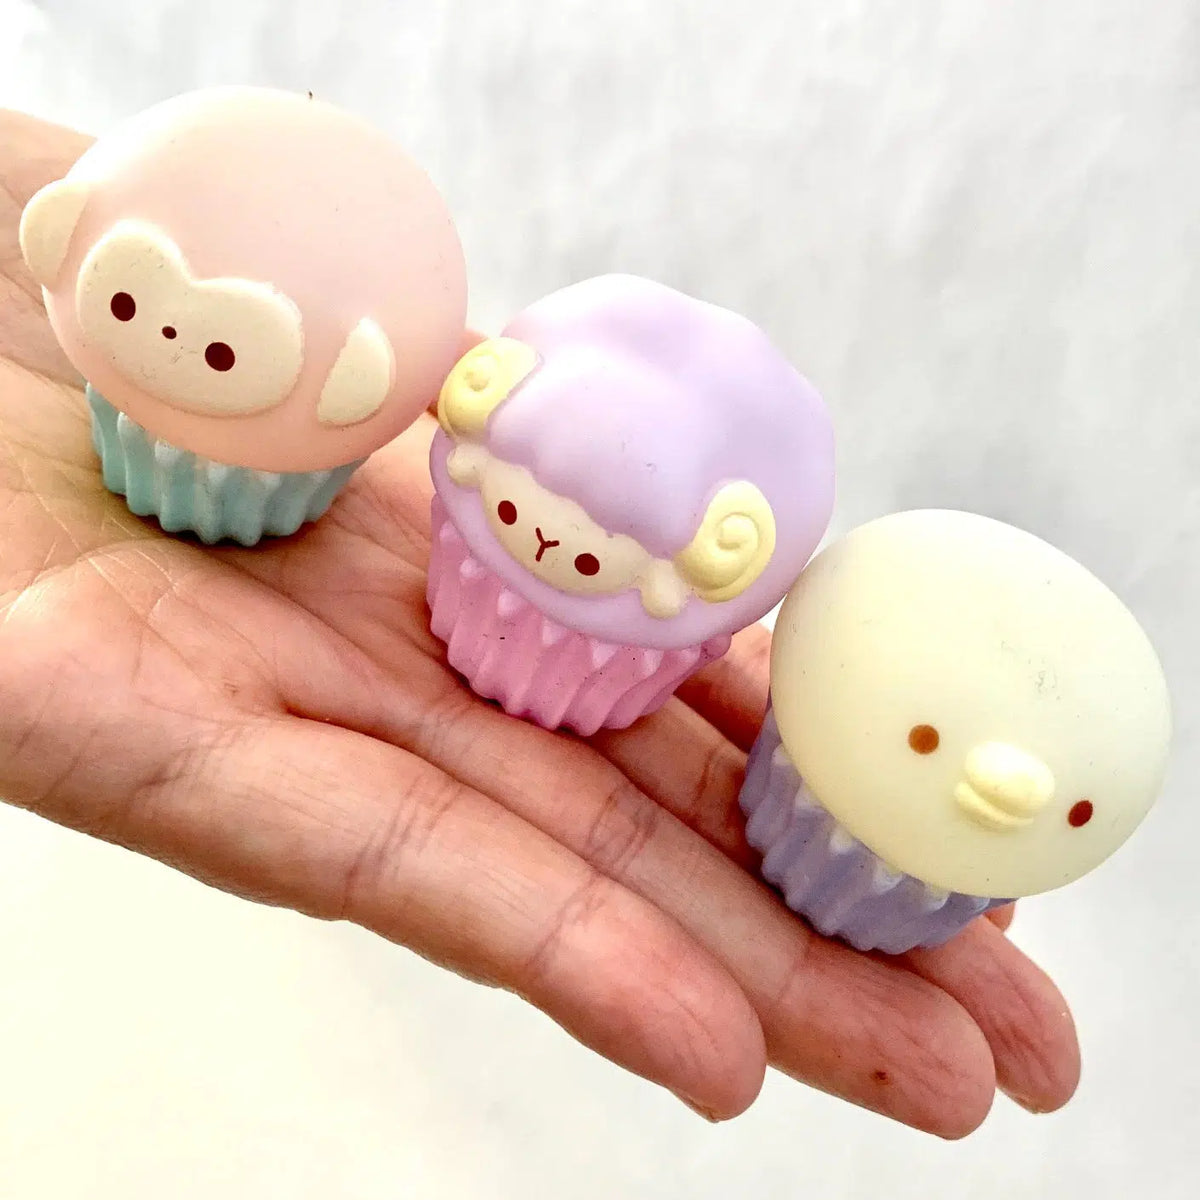 Front view of three different style of animals on three different colored cupcake tins.